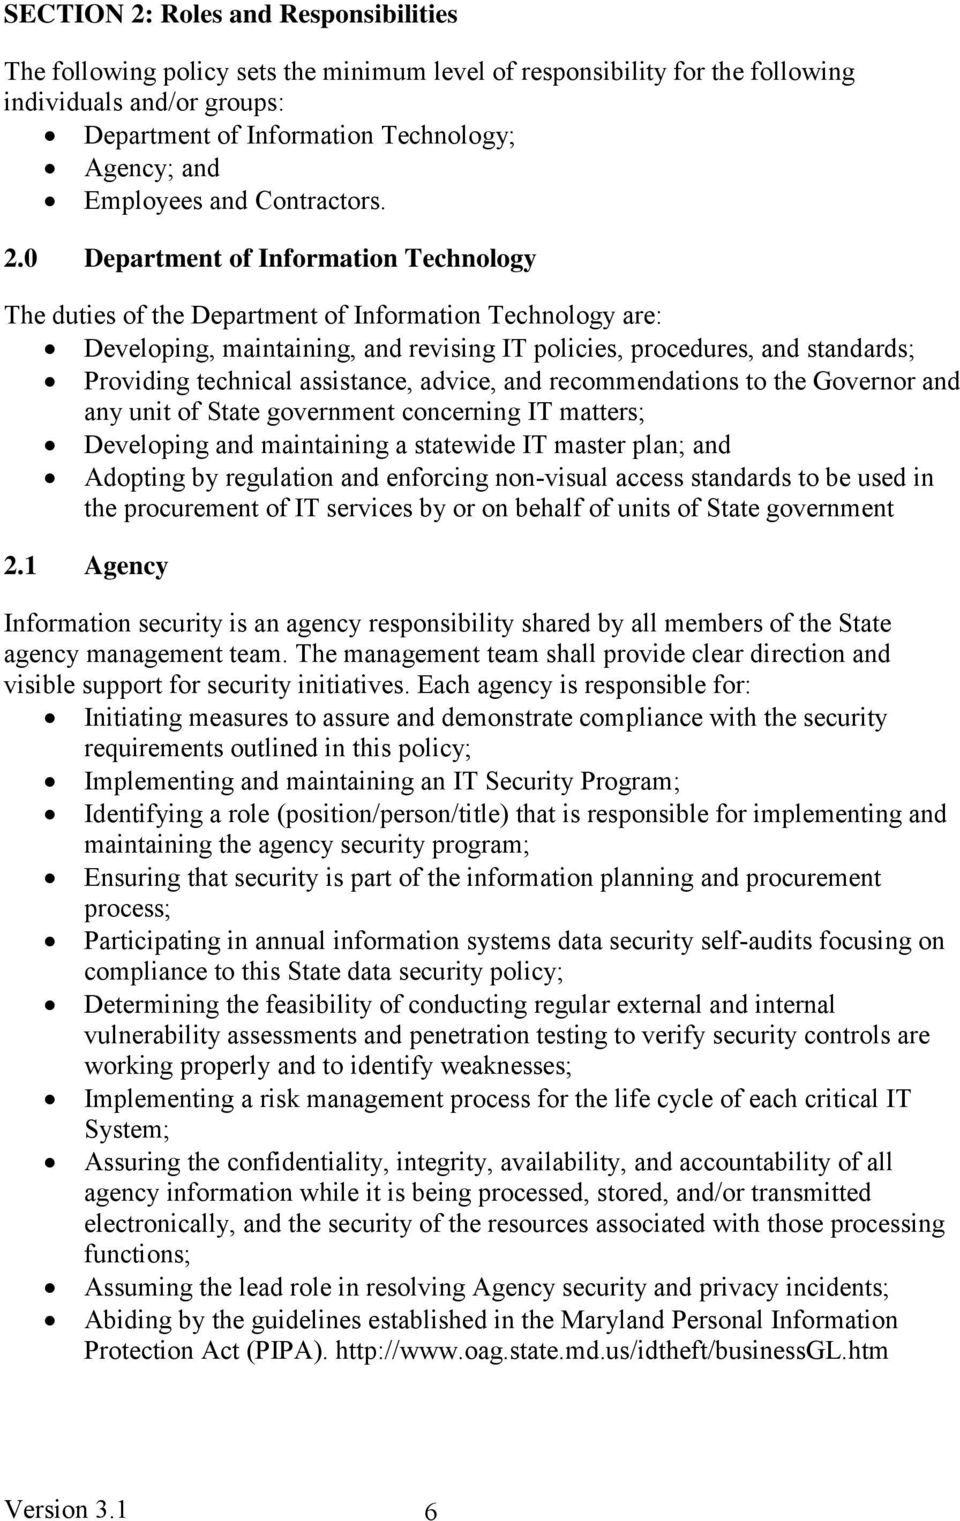 0 Department of Information Technology The duties of the Department of Information Technology are: Developing, maintaining, and revising IT policies, procedures, and standards; Providing technical